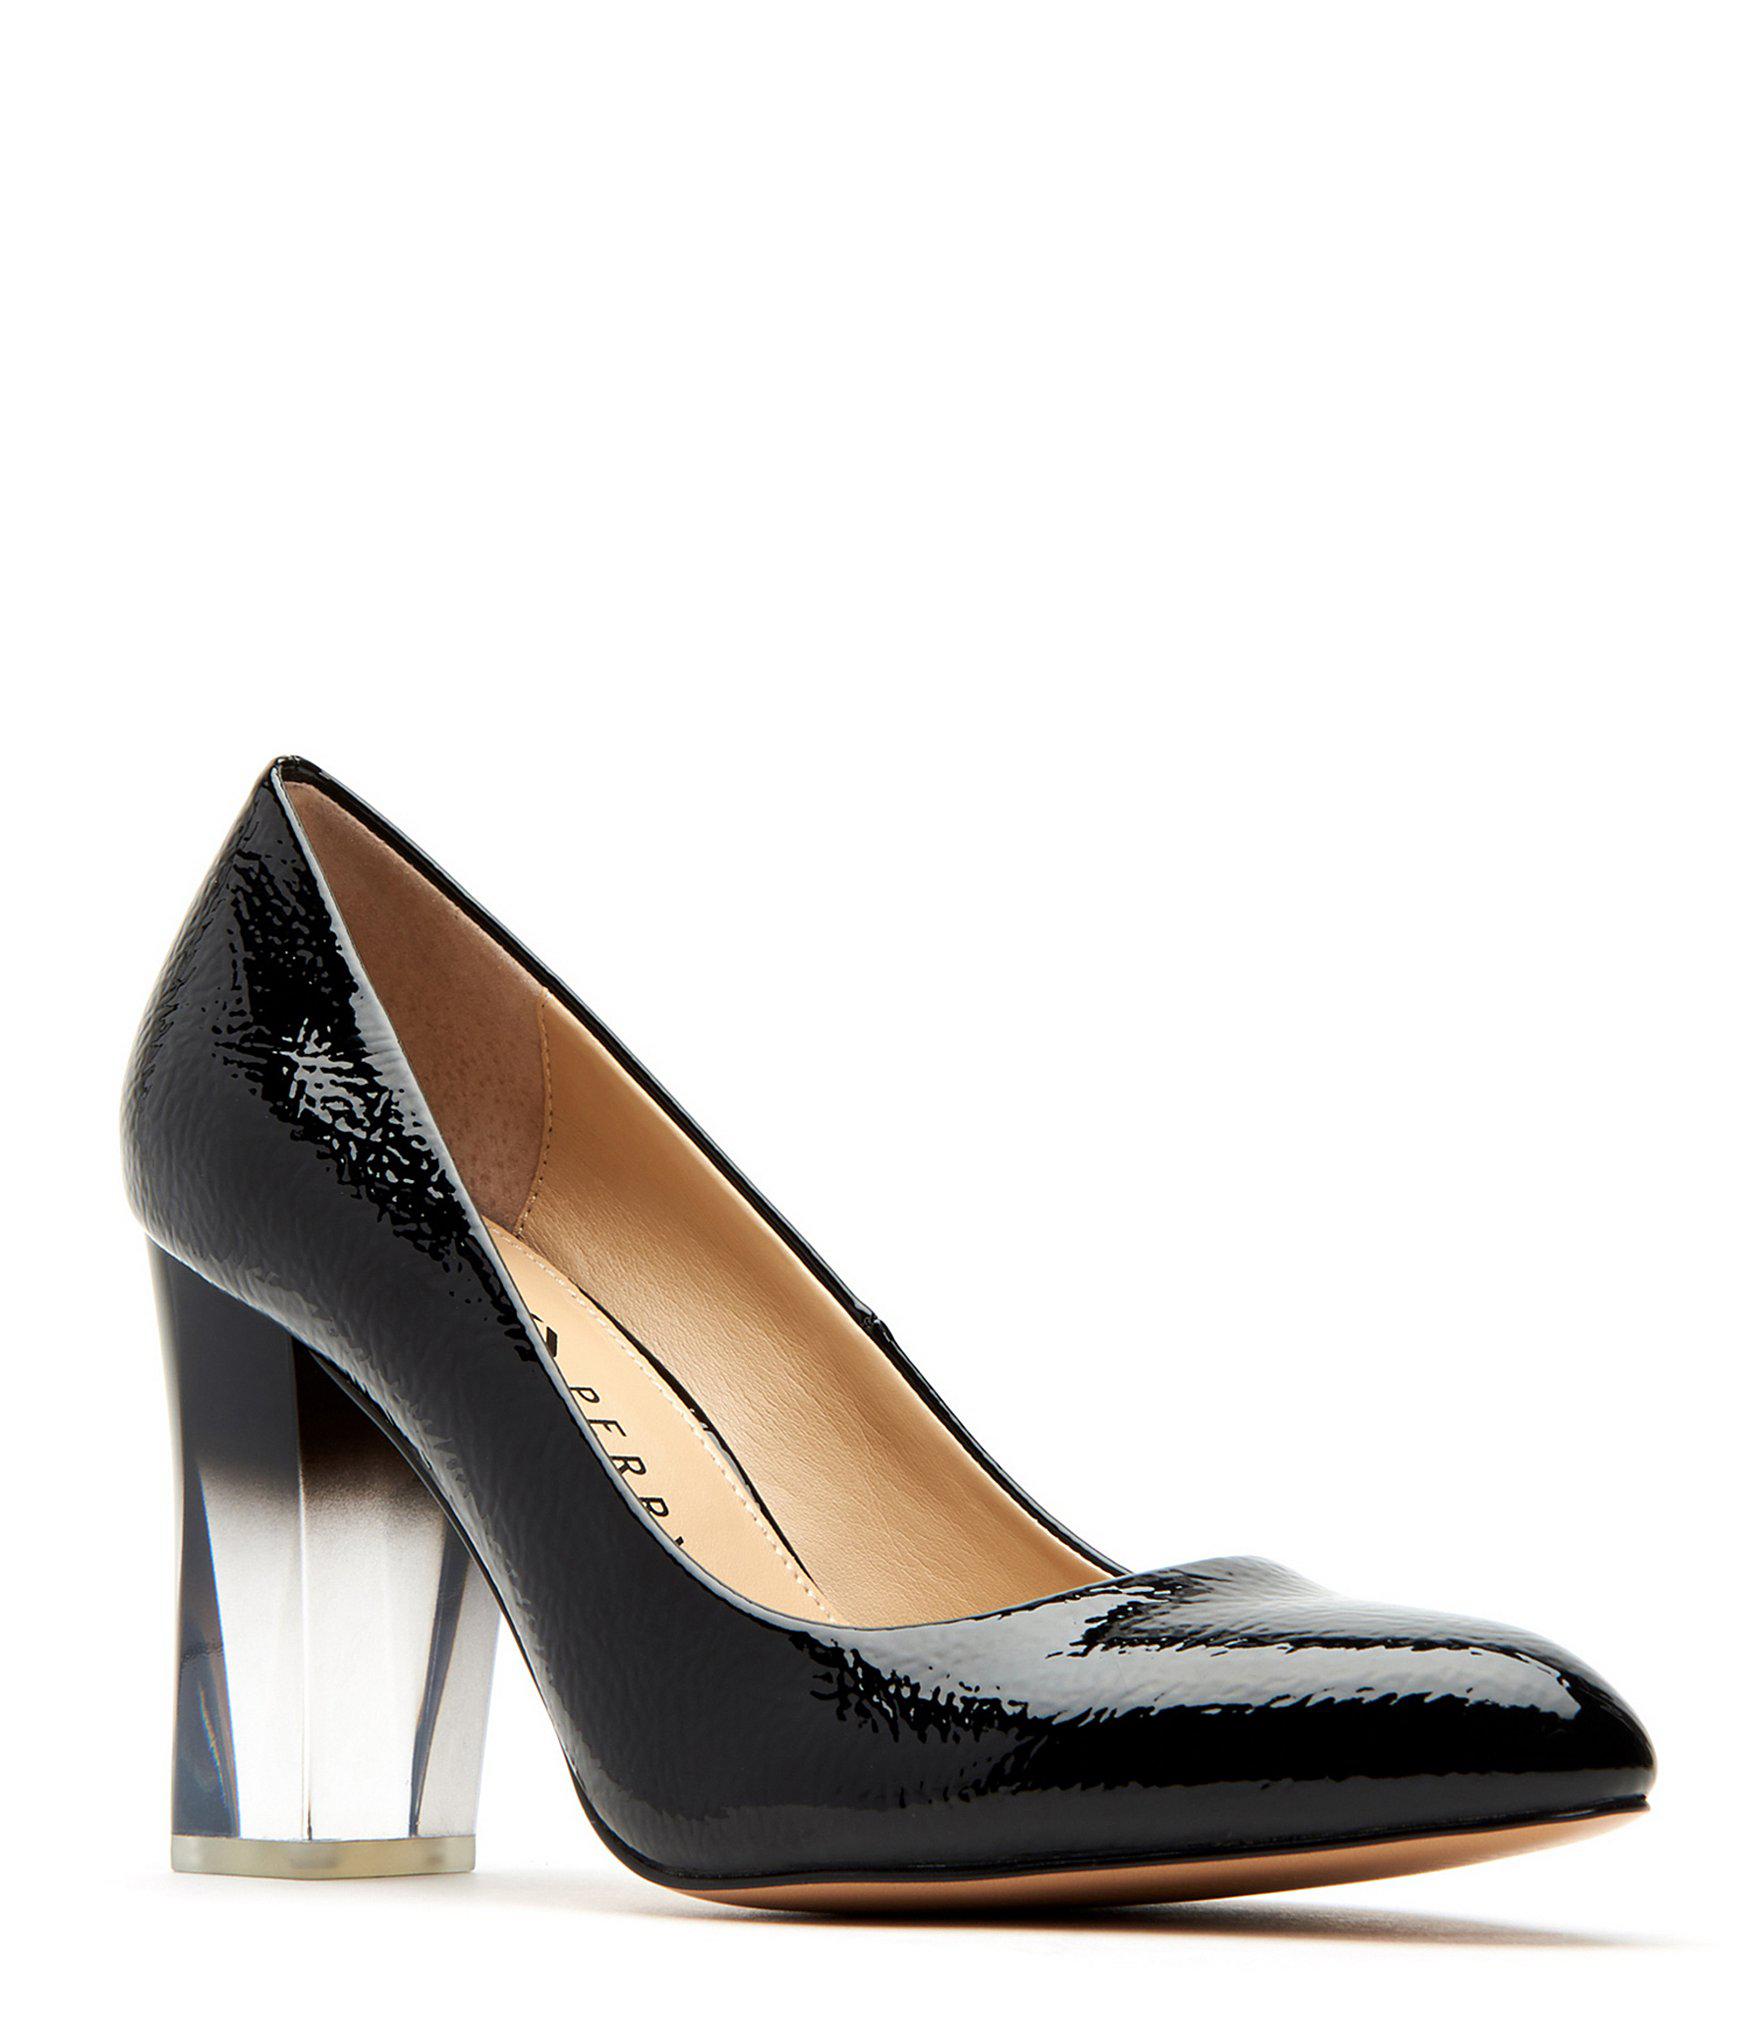 Lyst - Katy Perry The A.w. Ombré-lucite Pumps in Black